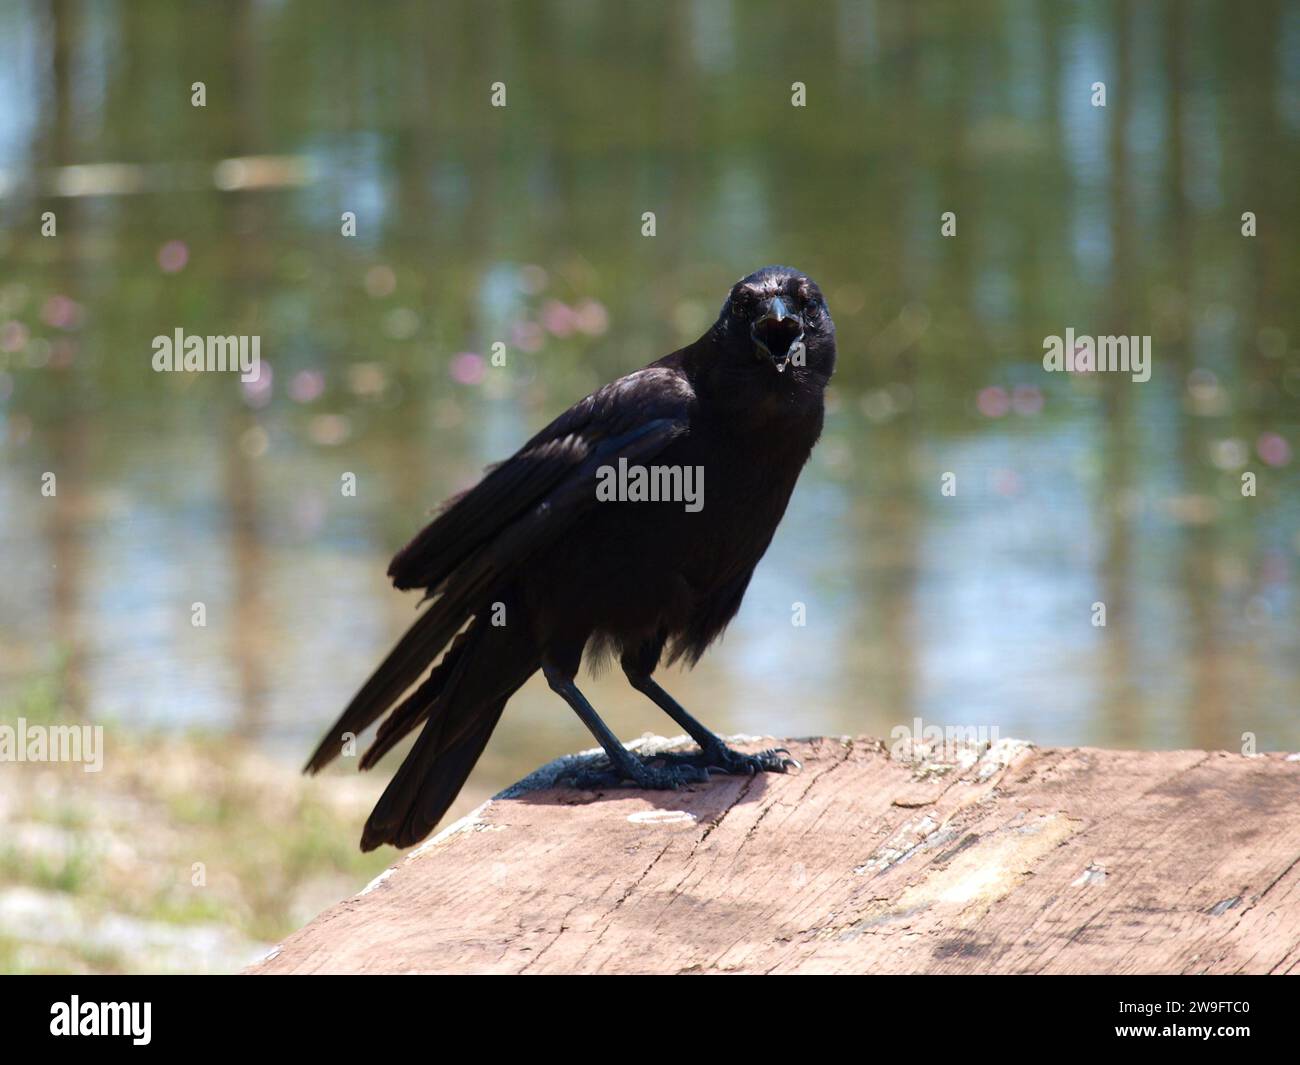 Black crow looking to the camera in the shores of a lake. Stock Photo